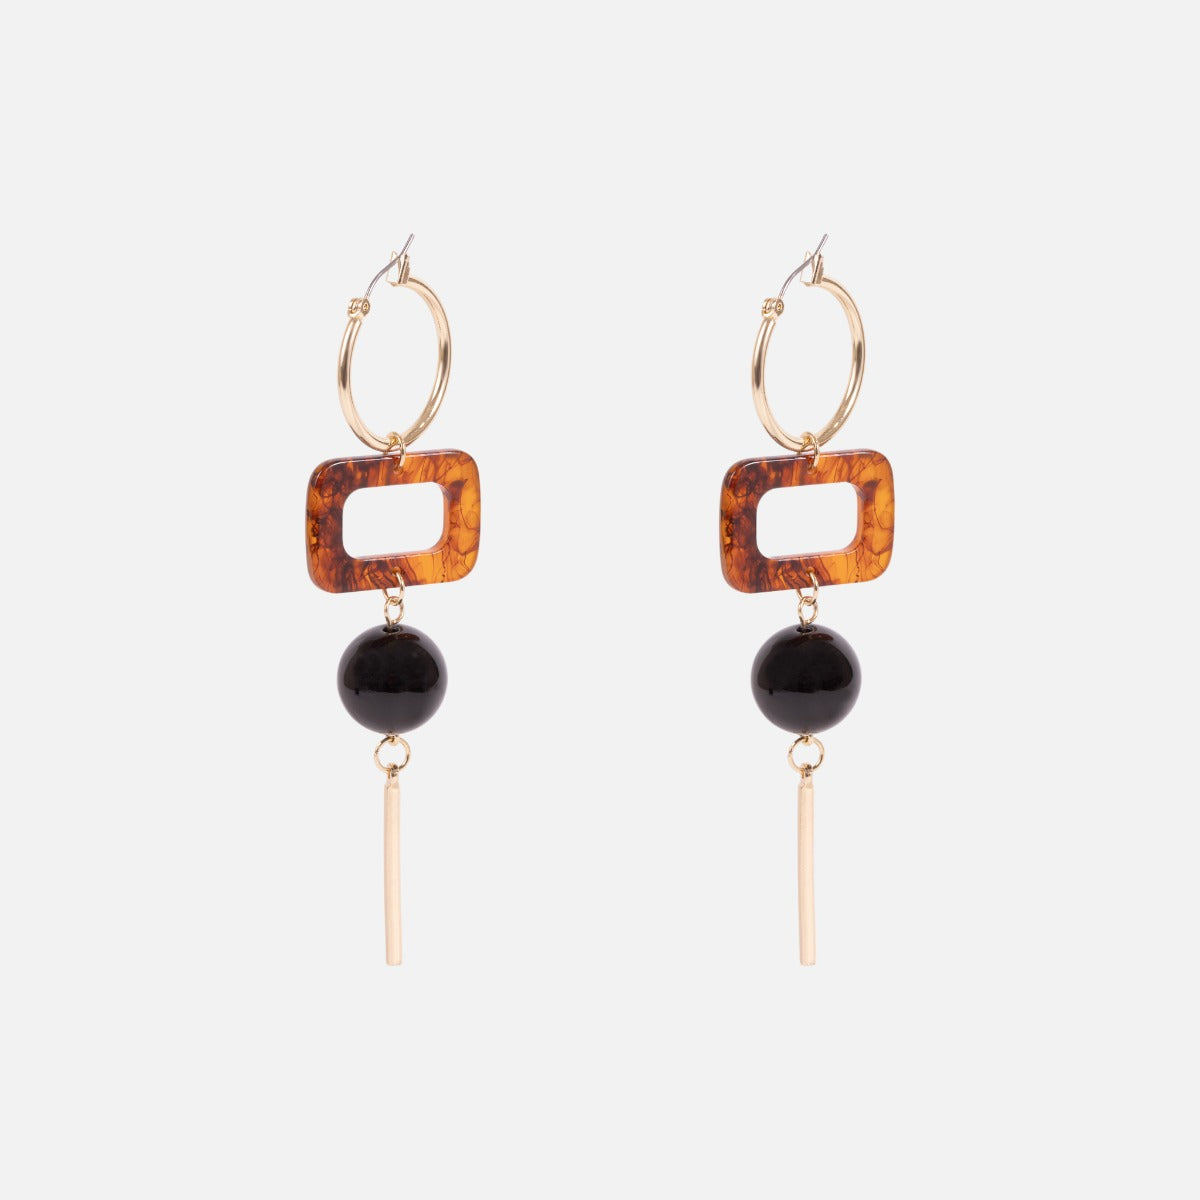 Long earrings with a rectangular tortoise pattern, a black bead and a golden bar